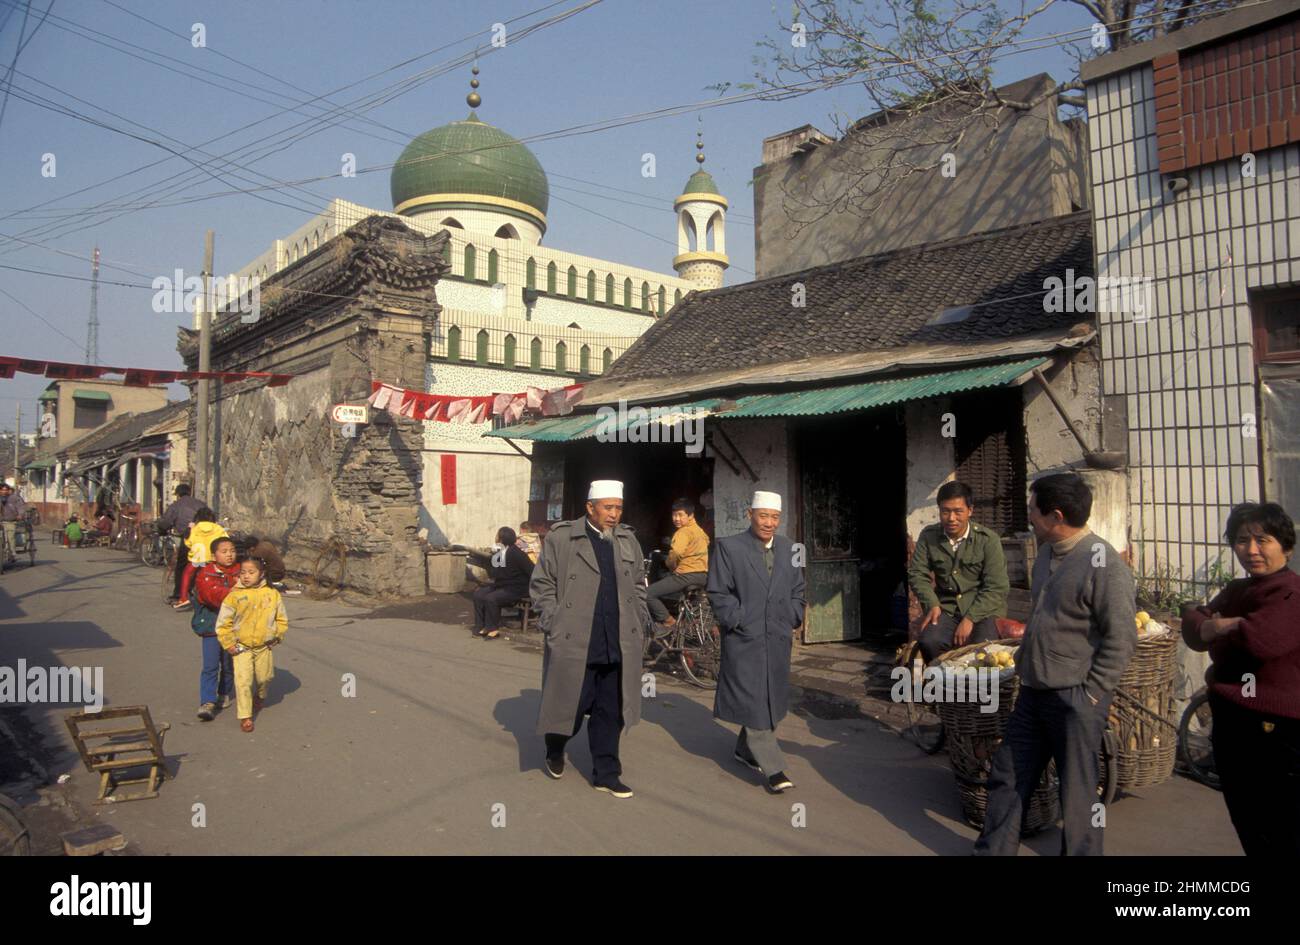 the mosque of Kaifeng in the City of Kaifeng in the Province of Henan in China.  China, Kaifeng, November, 1996 Stock Photo